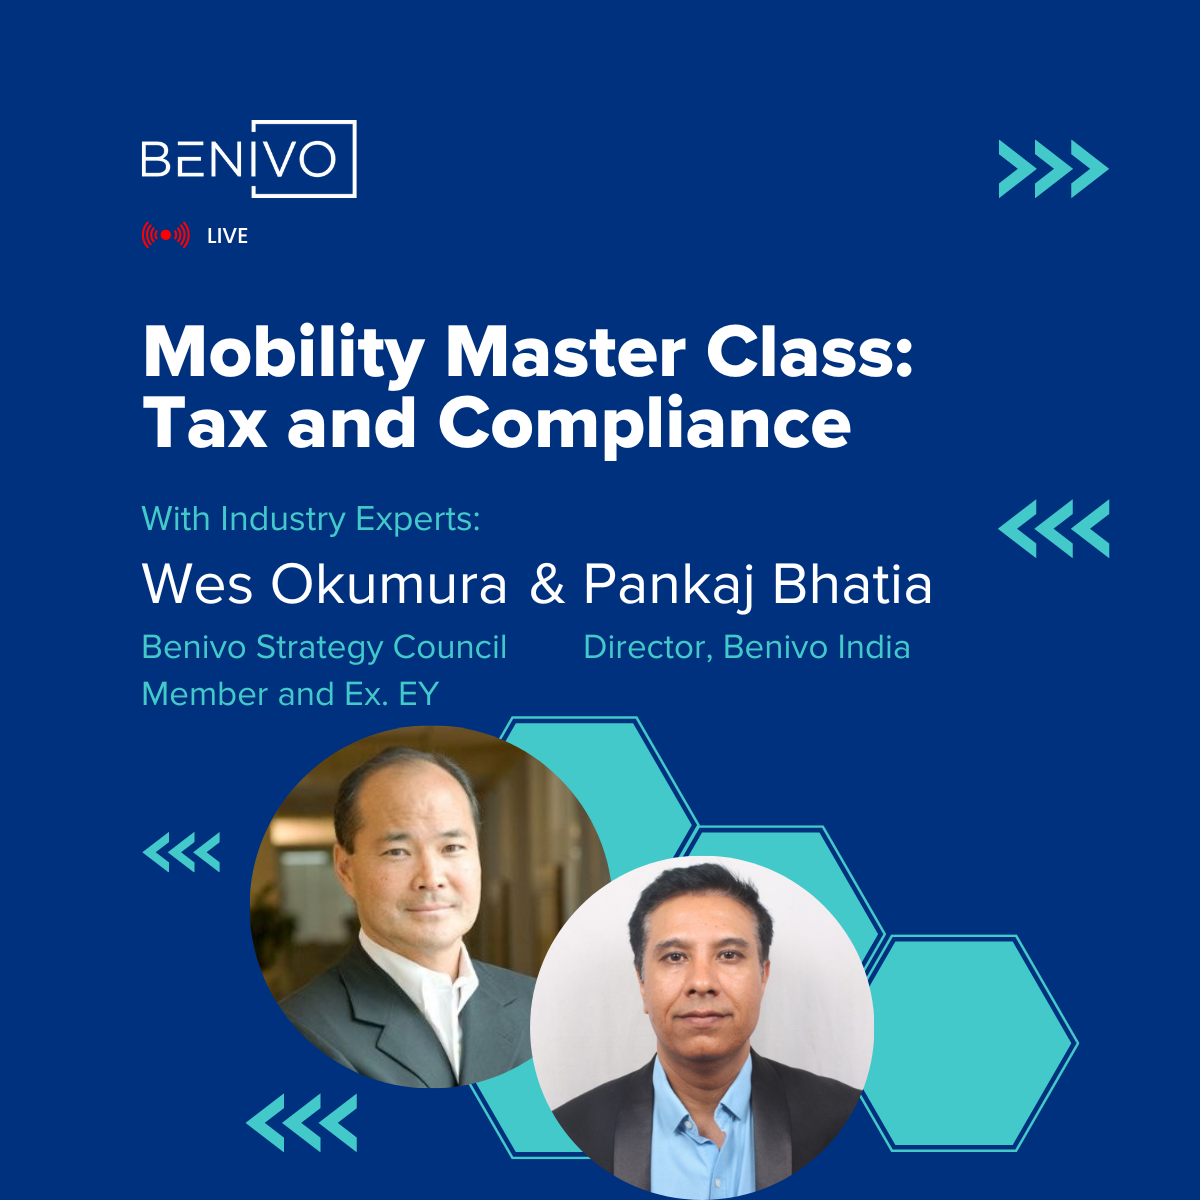 New Mobility Master Class Series on Tax and Compliance